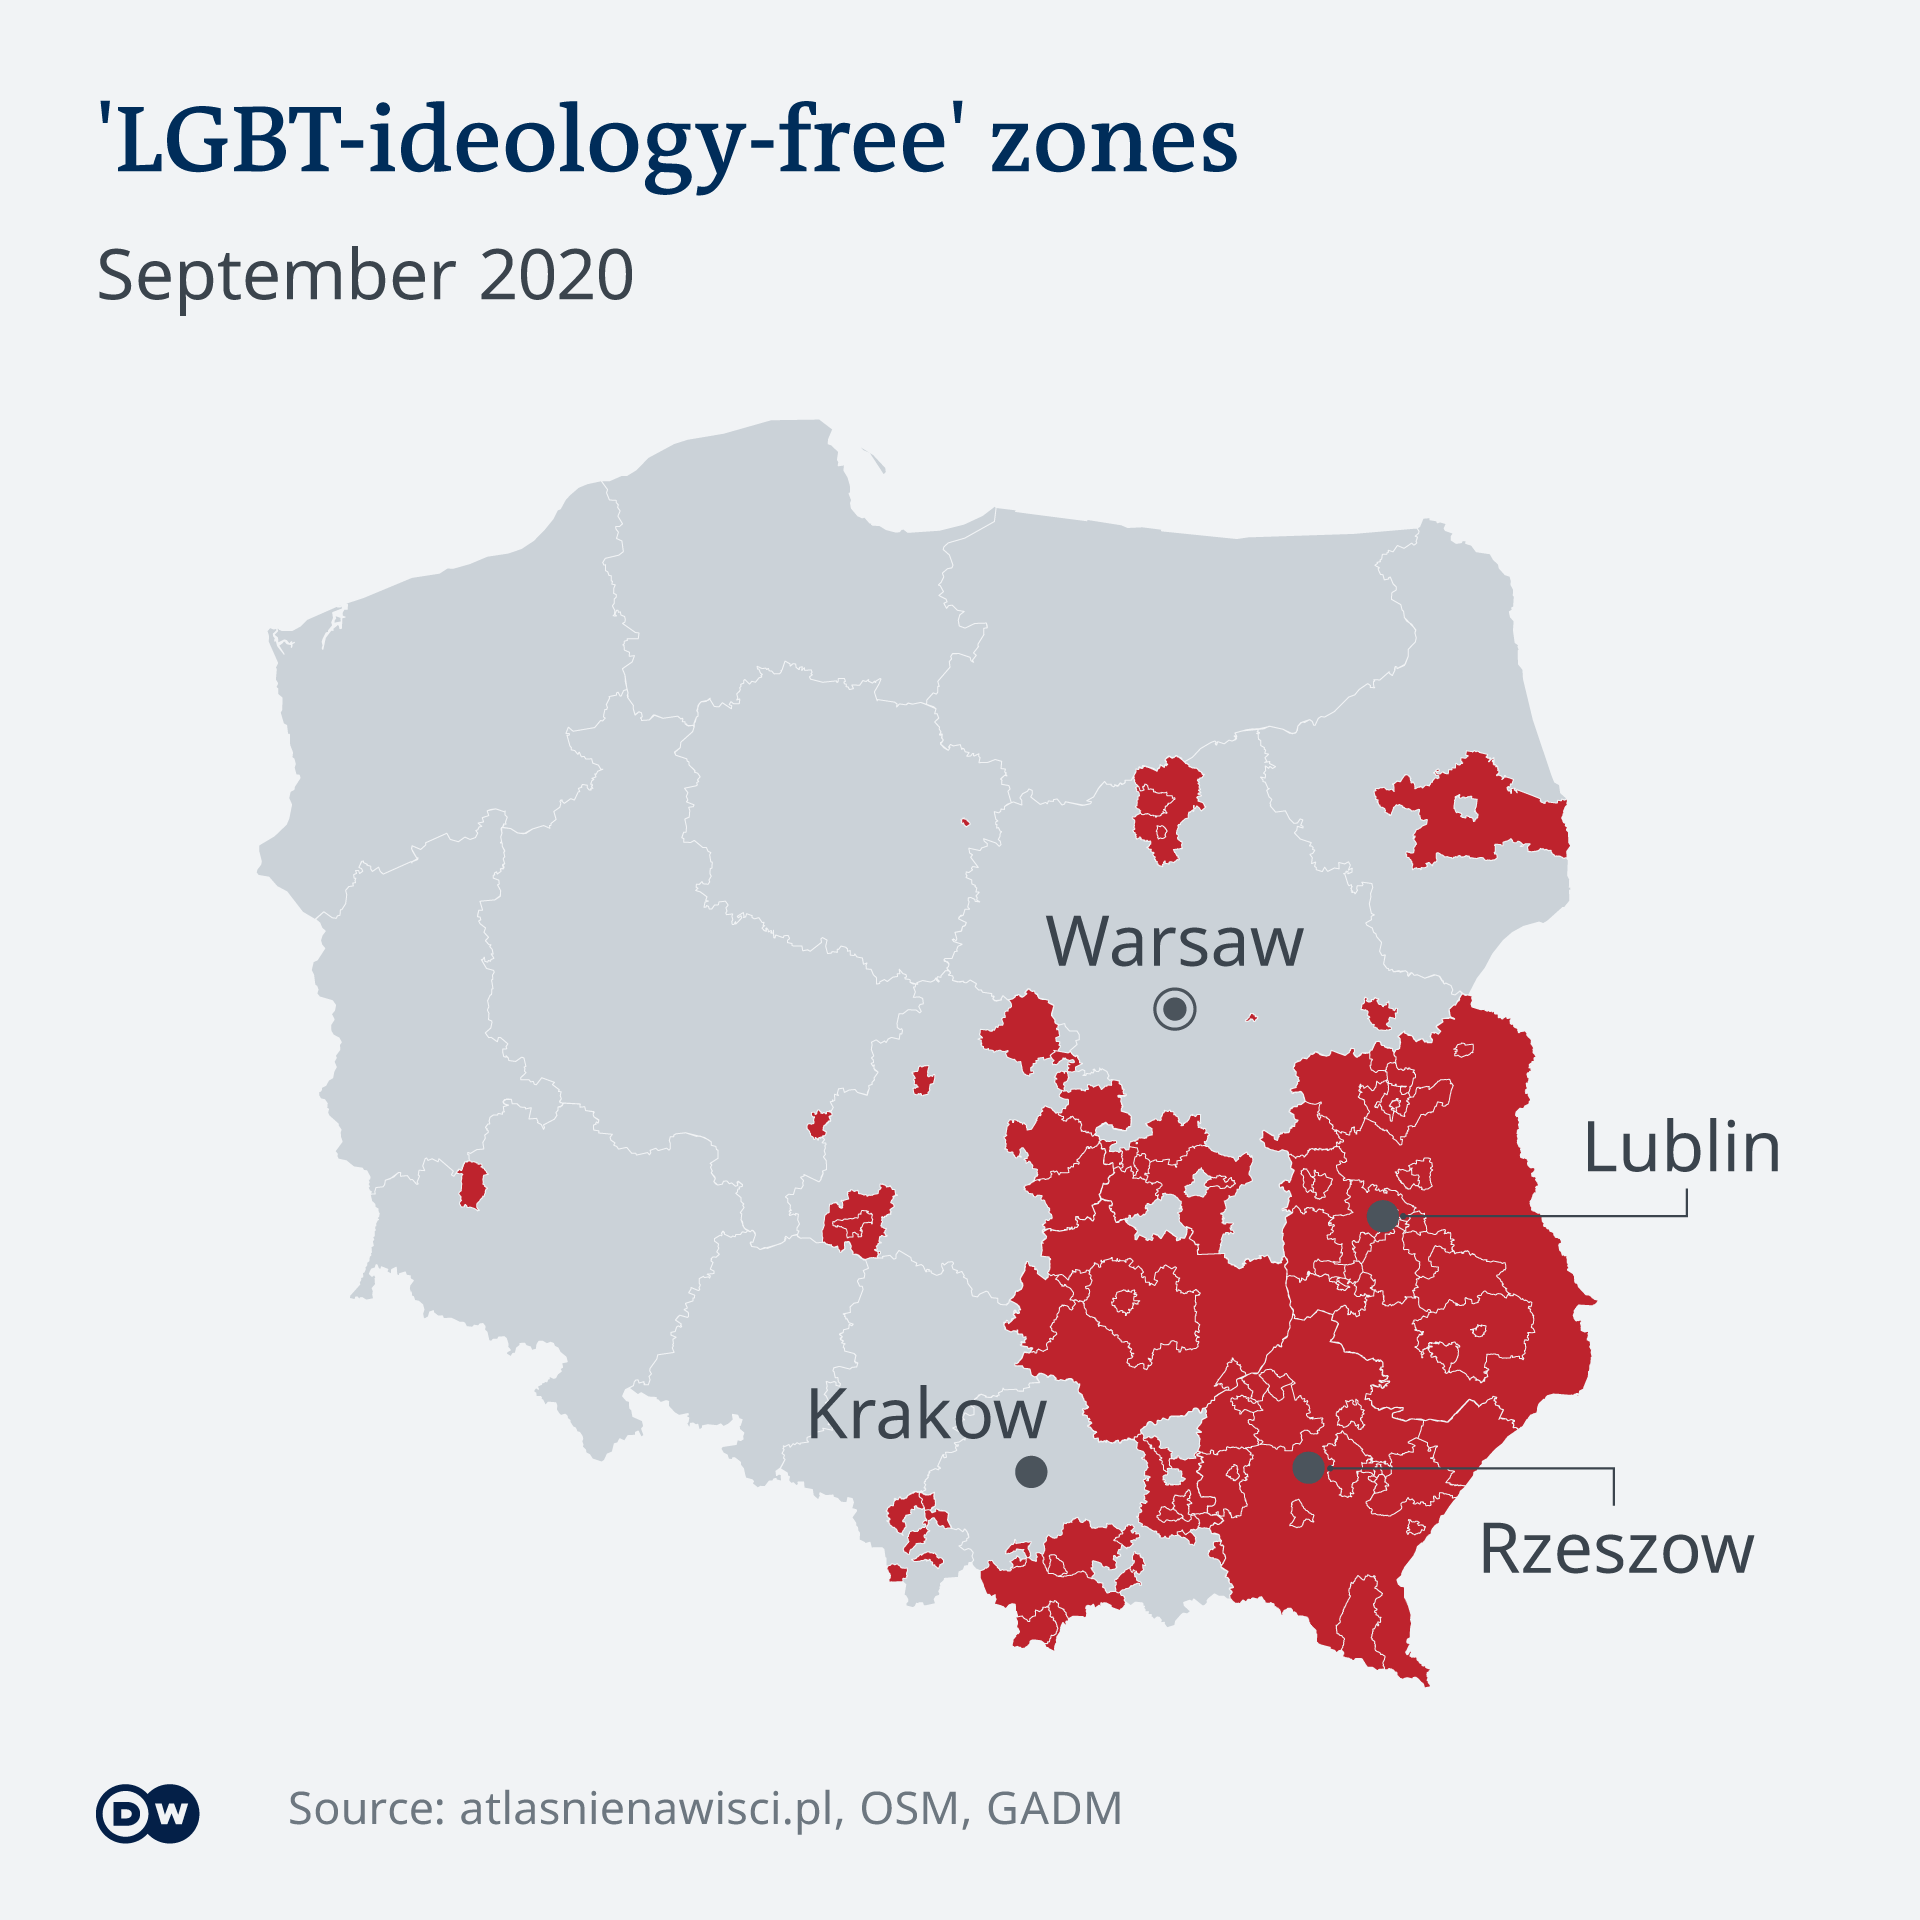 Map showing the extent of LGBT-ideology-free zones in Poland